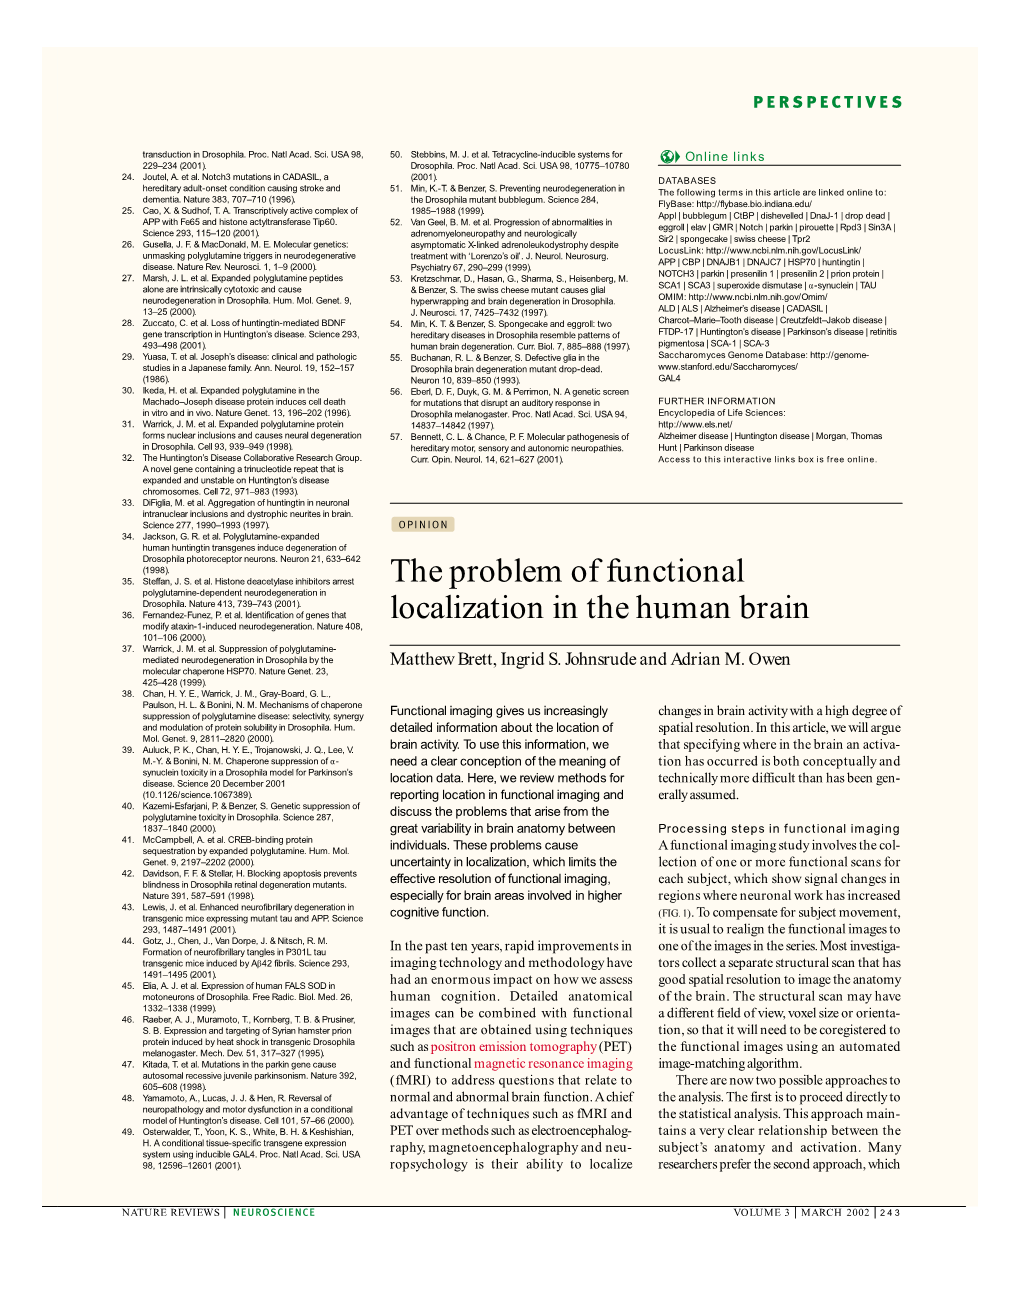 The Problem of Functional Localization in the Human Brain